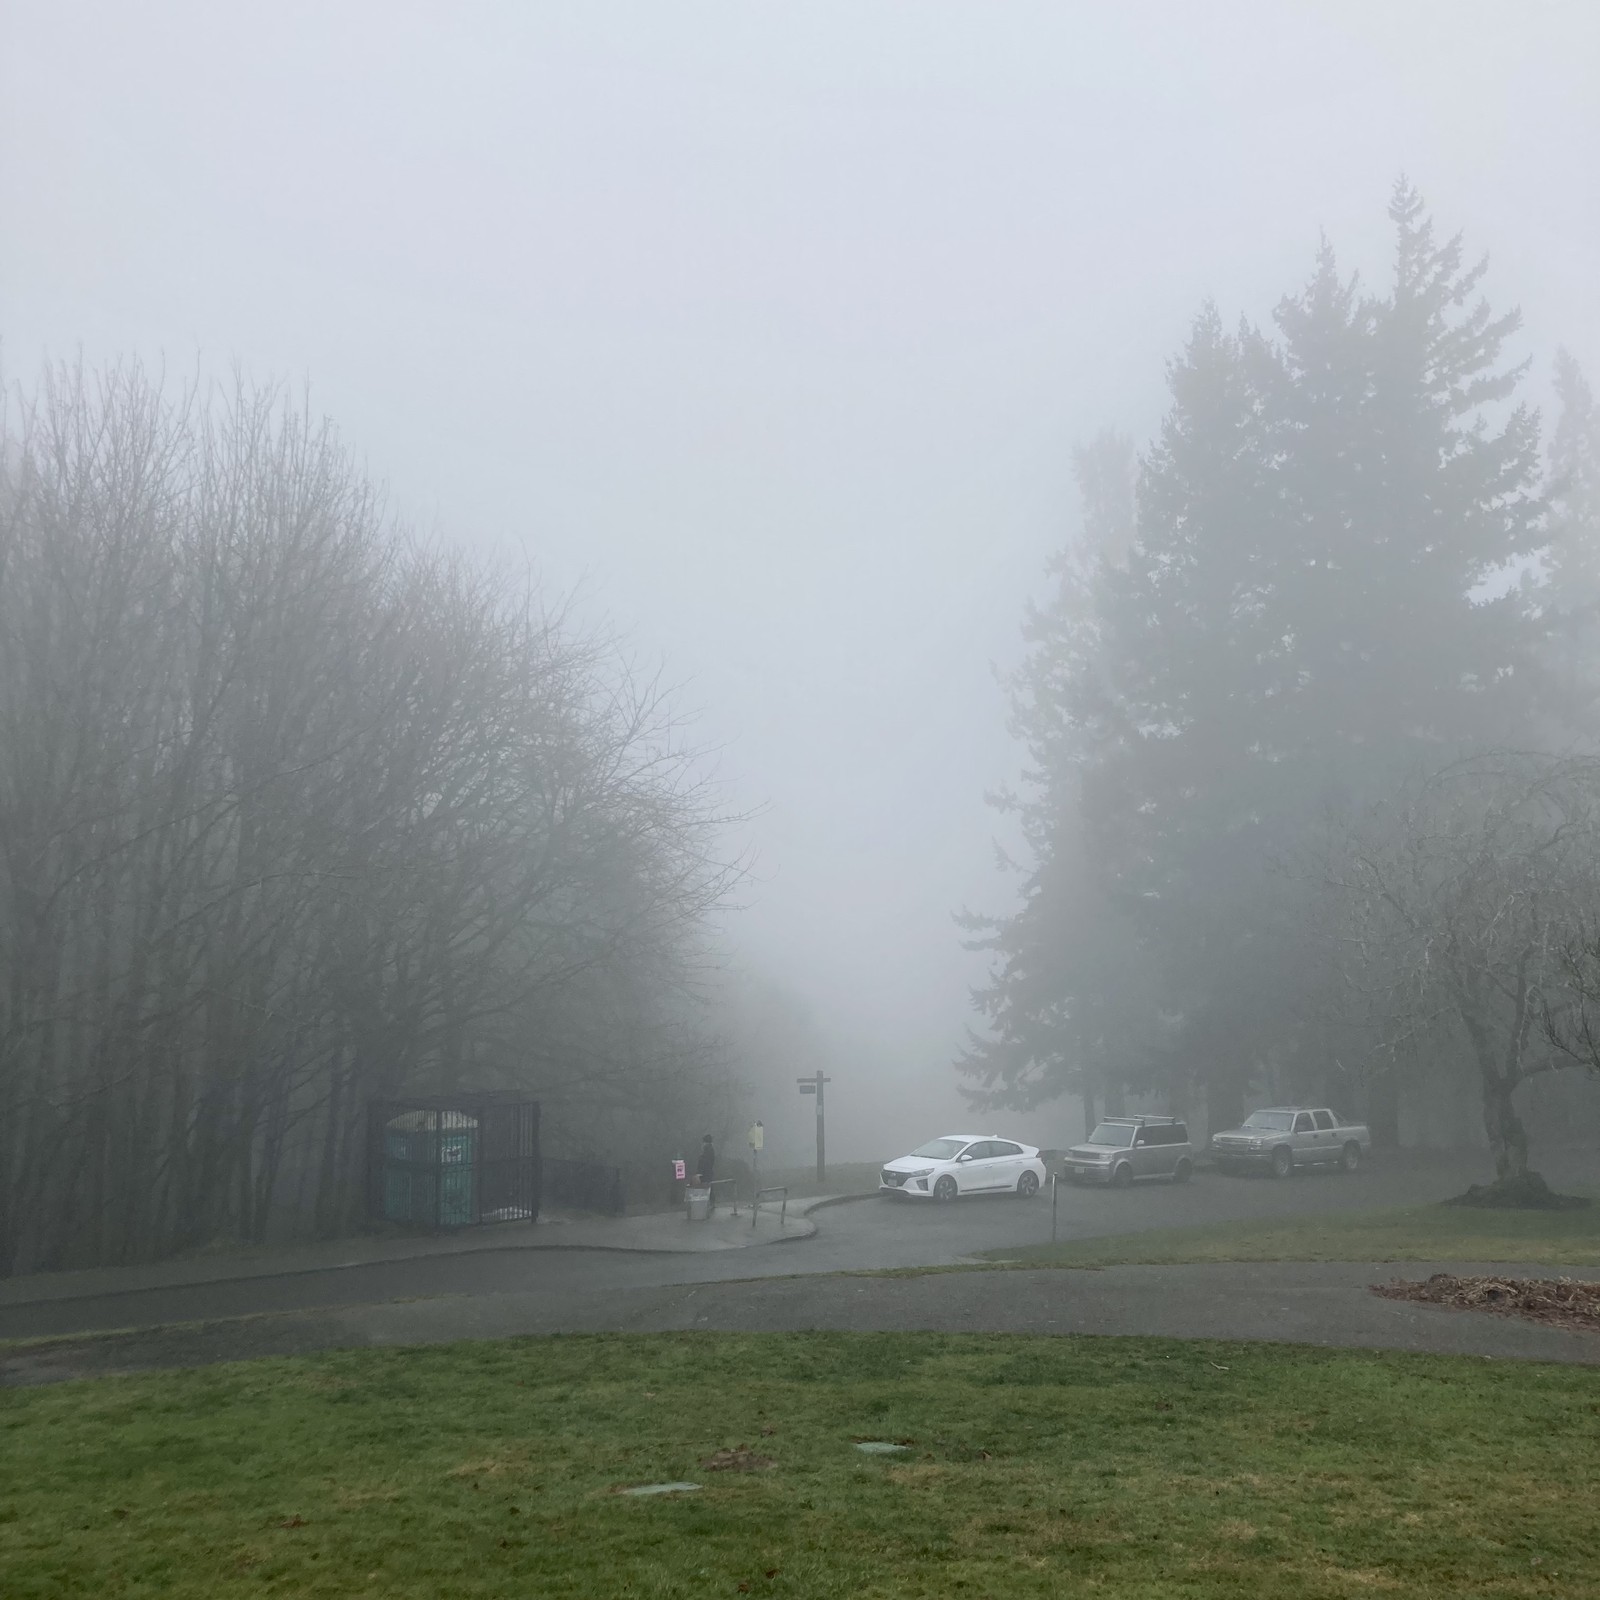 “View” from Council Crest Park toward Mt Hood, which is completely obscured by a thick cloud hanging over the hill on which the park sits. 3 cars are parked in the near midground, blurry in the mist. A lone person stands near a portapotty at the same distance, reading a sign.